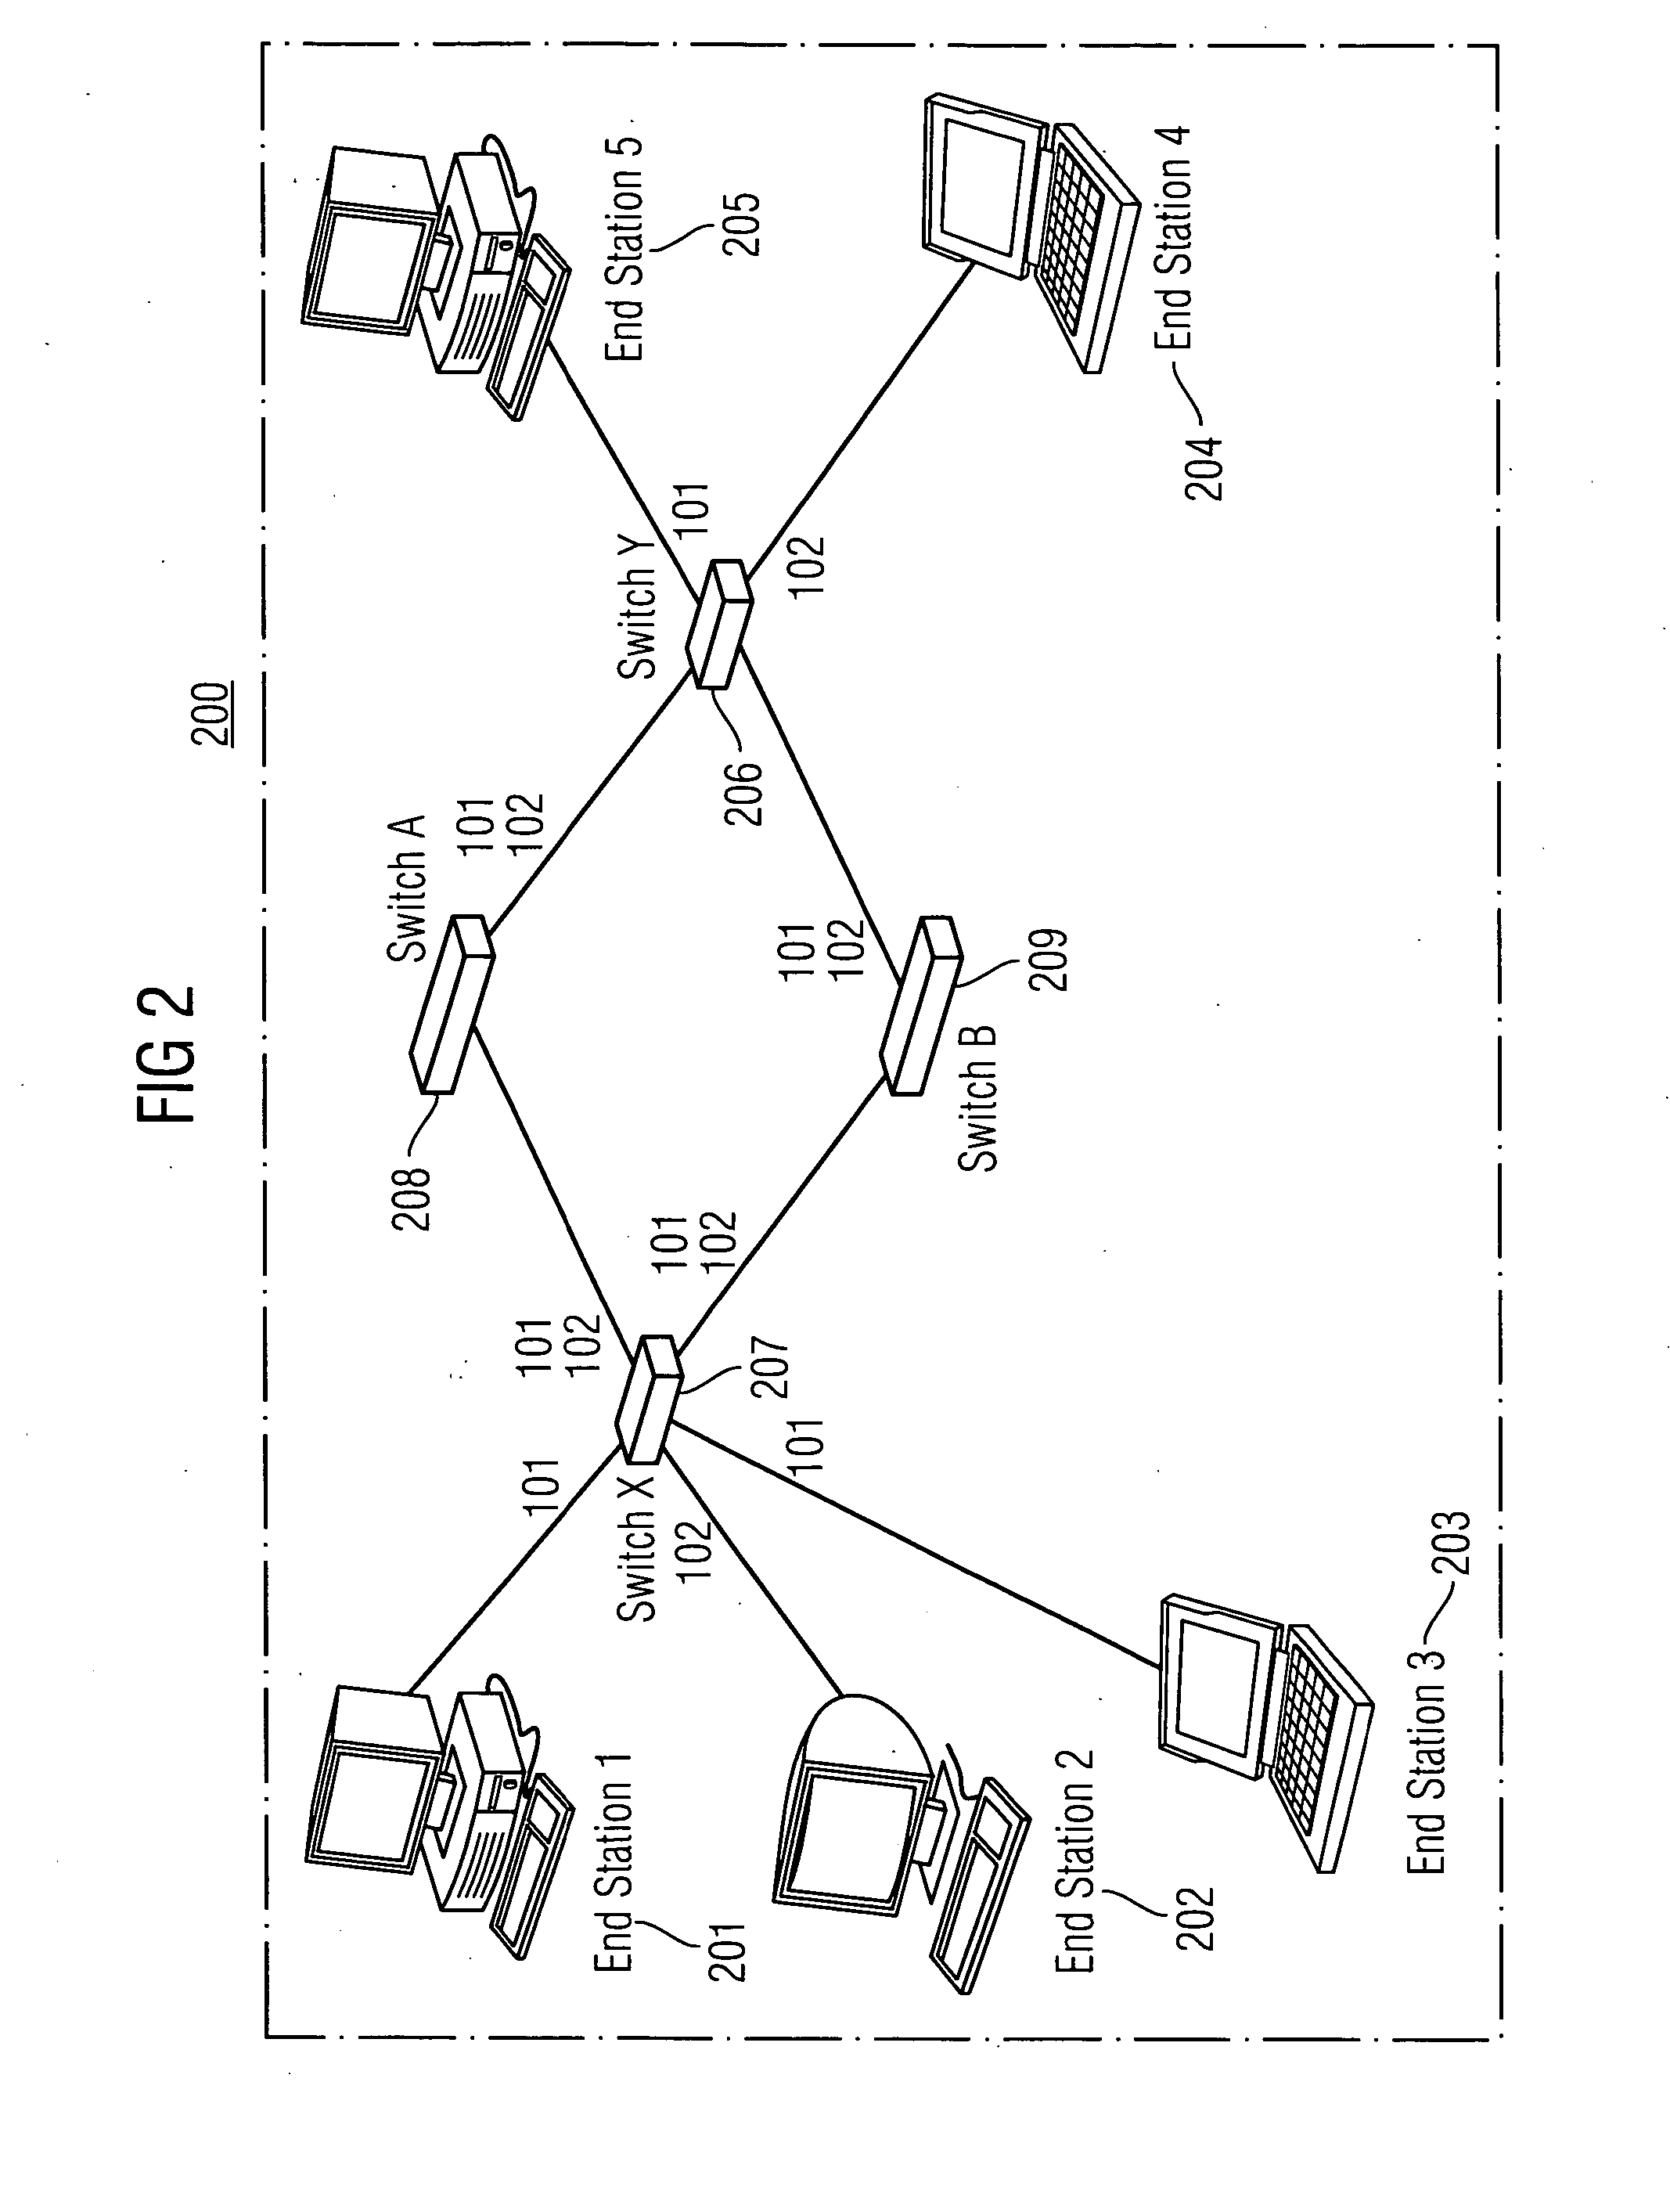 Message handling in a local area network having redundant paths